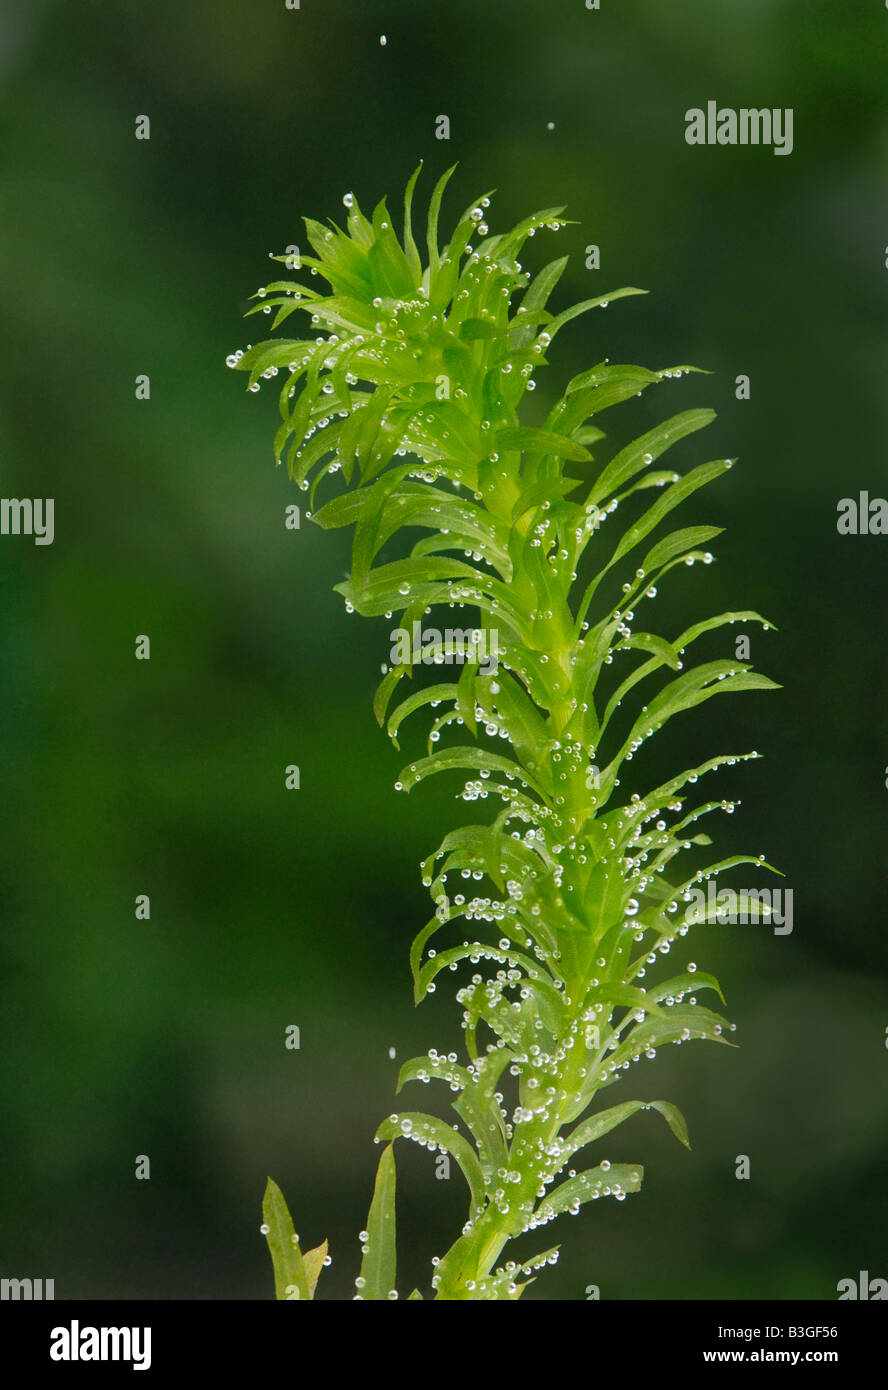 Sprig of the aquatic plant Elodea, pond weed producing oxygen bubbles from photosynthesis Stock Photo